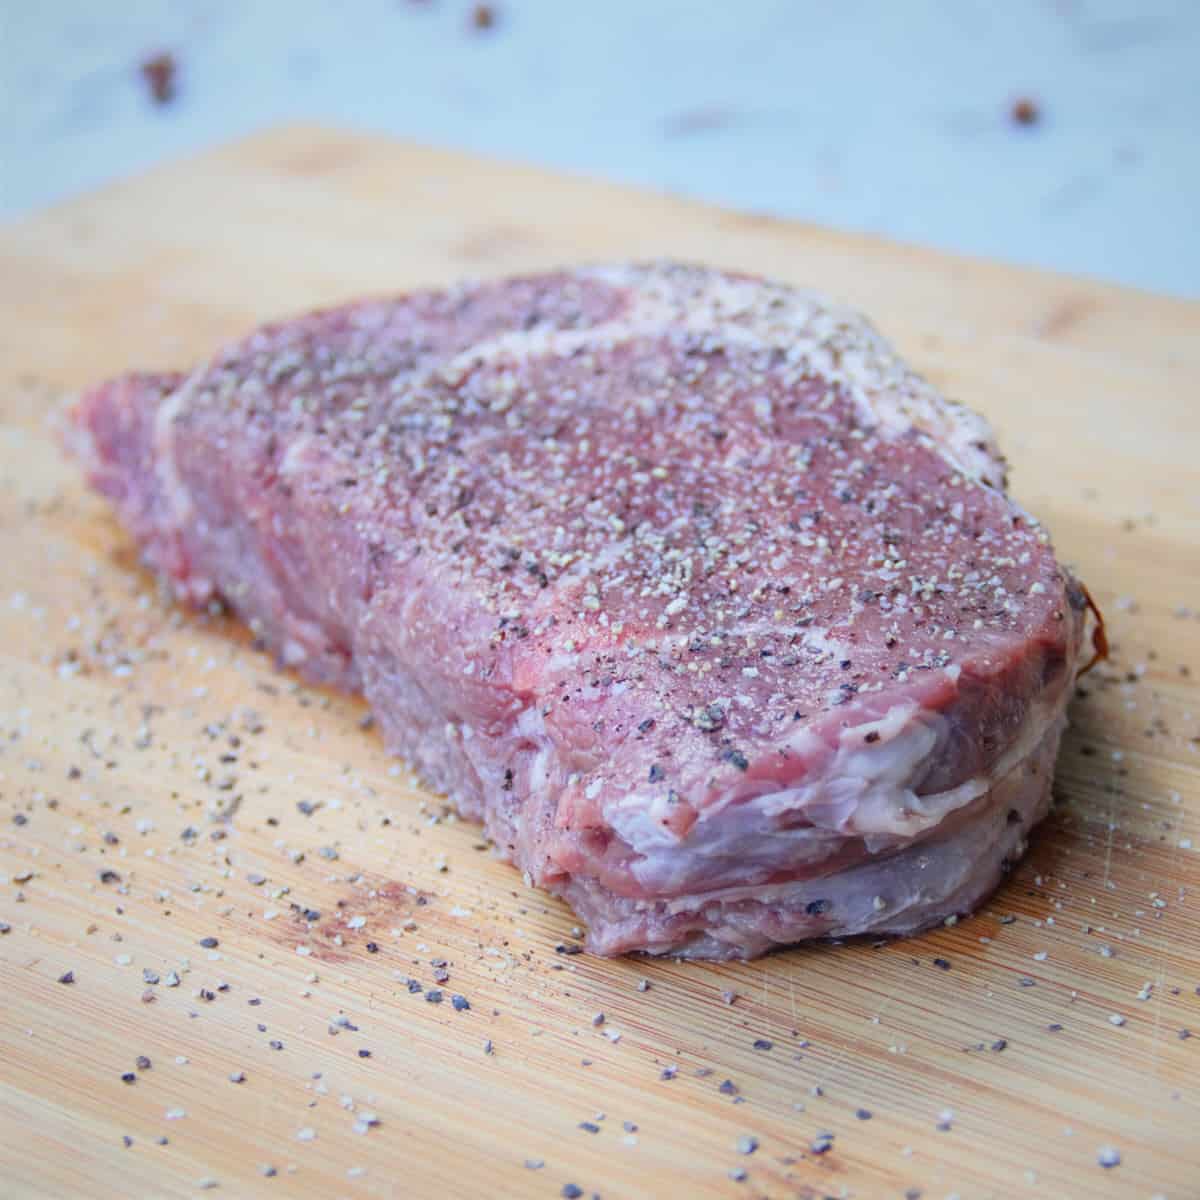 The ribeye steak is seasoned with the homemade three pepper rub waiting to be cooked.